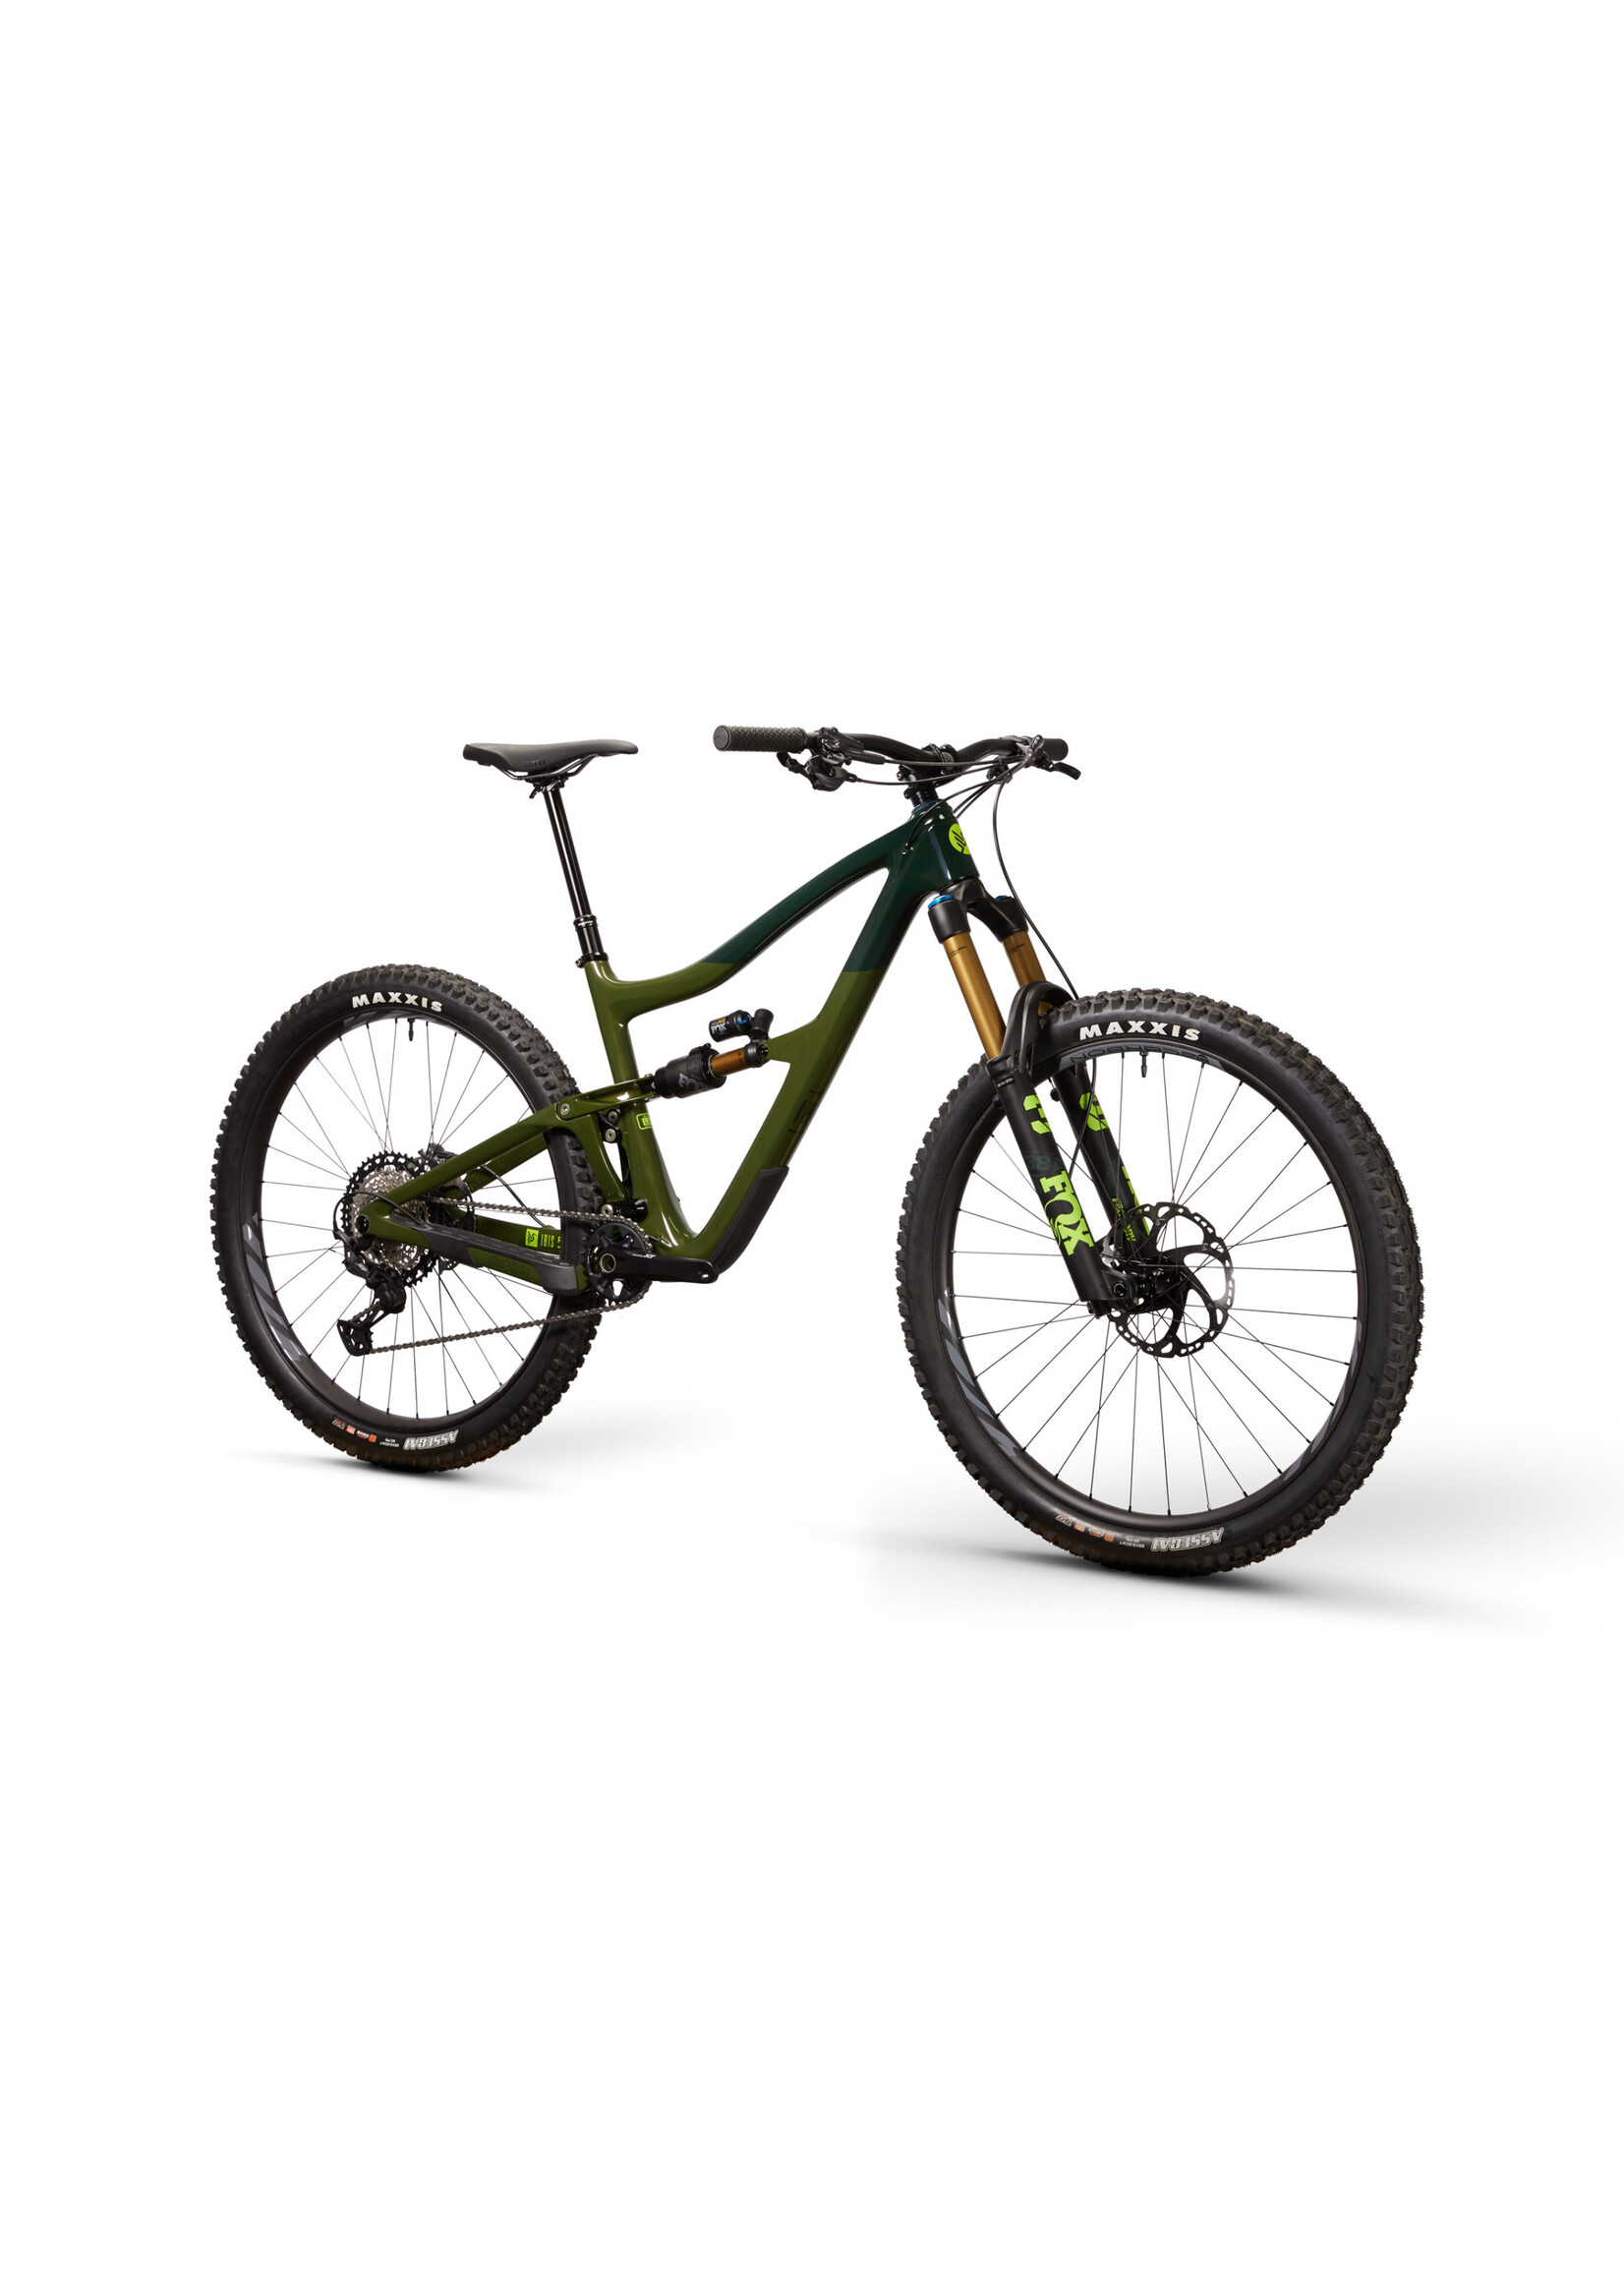 IBIS IBIS Ripmo CARBON, GX Builds starting at $4424.99! 25% off! *Call the shop to order*